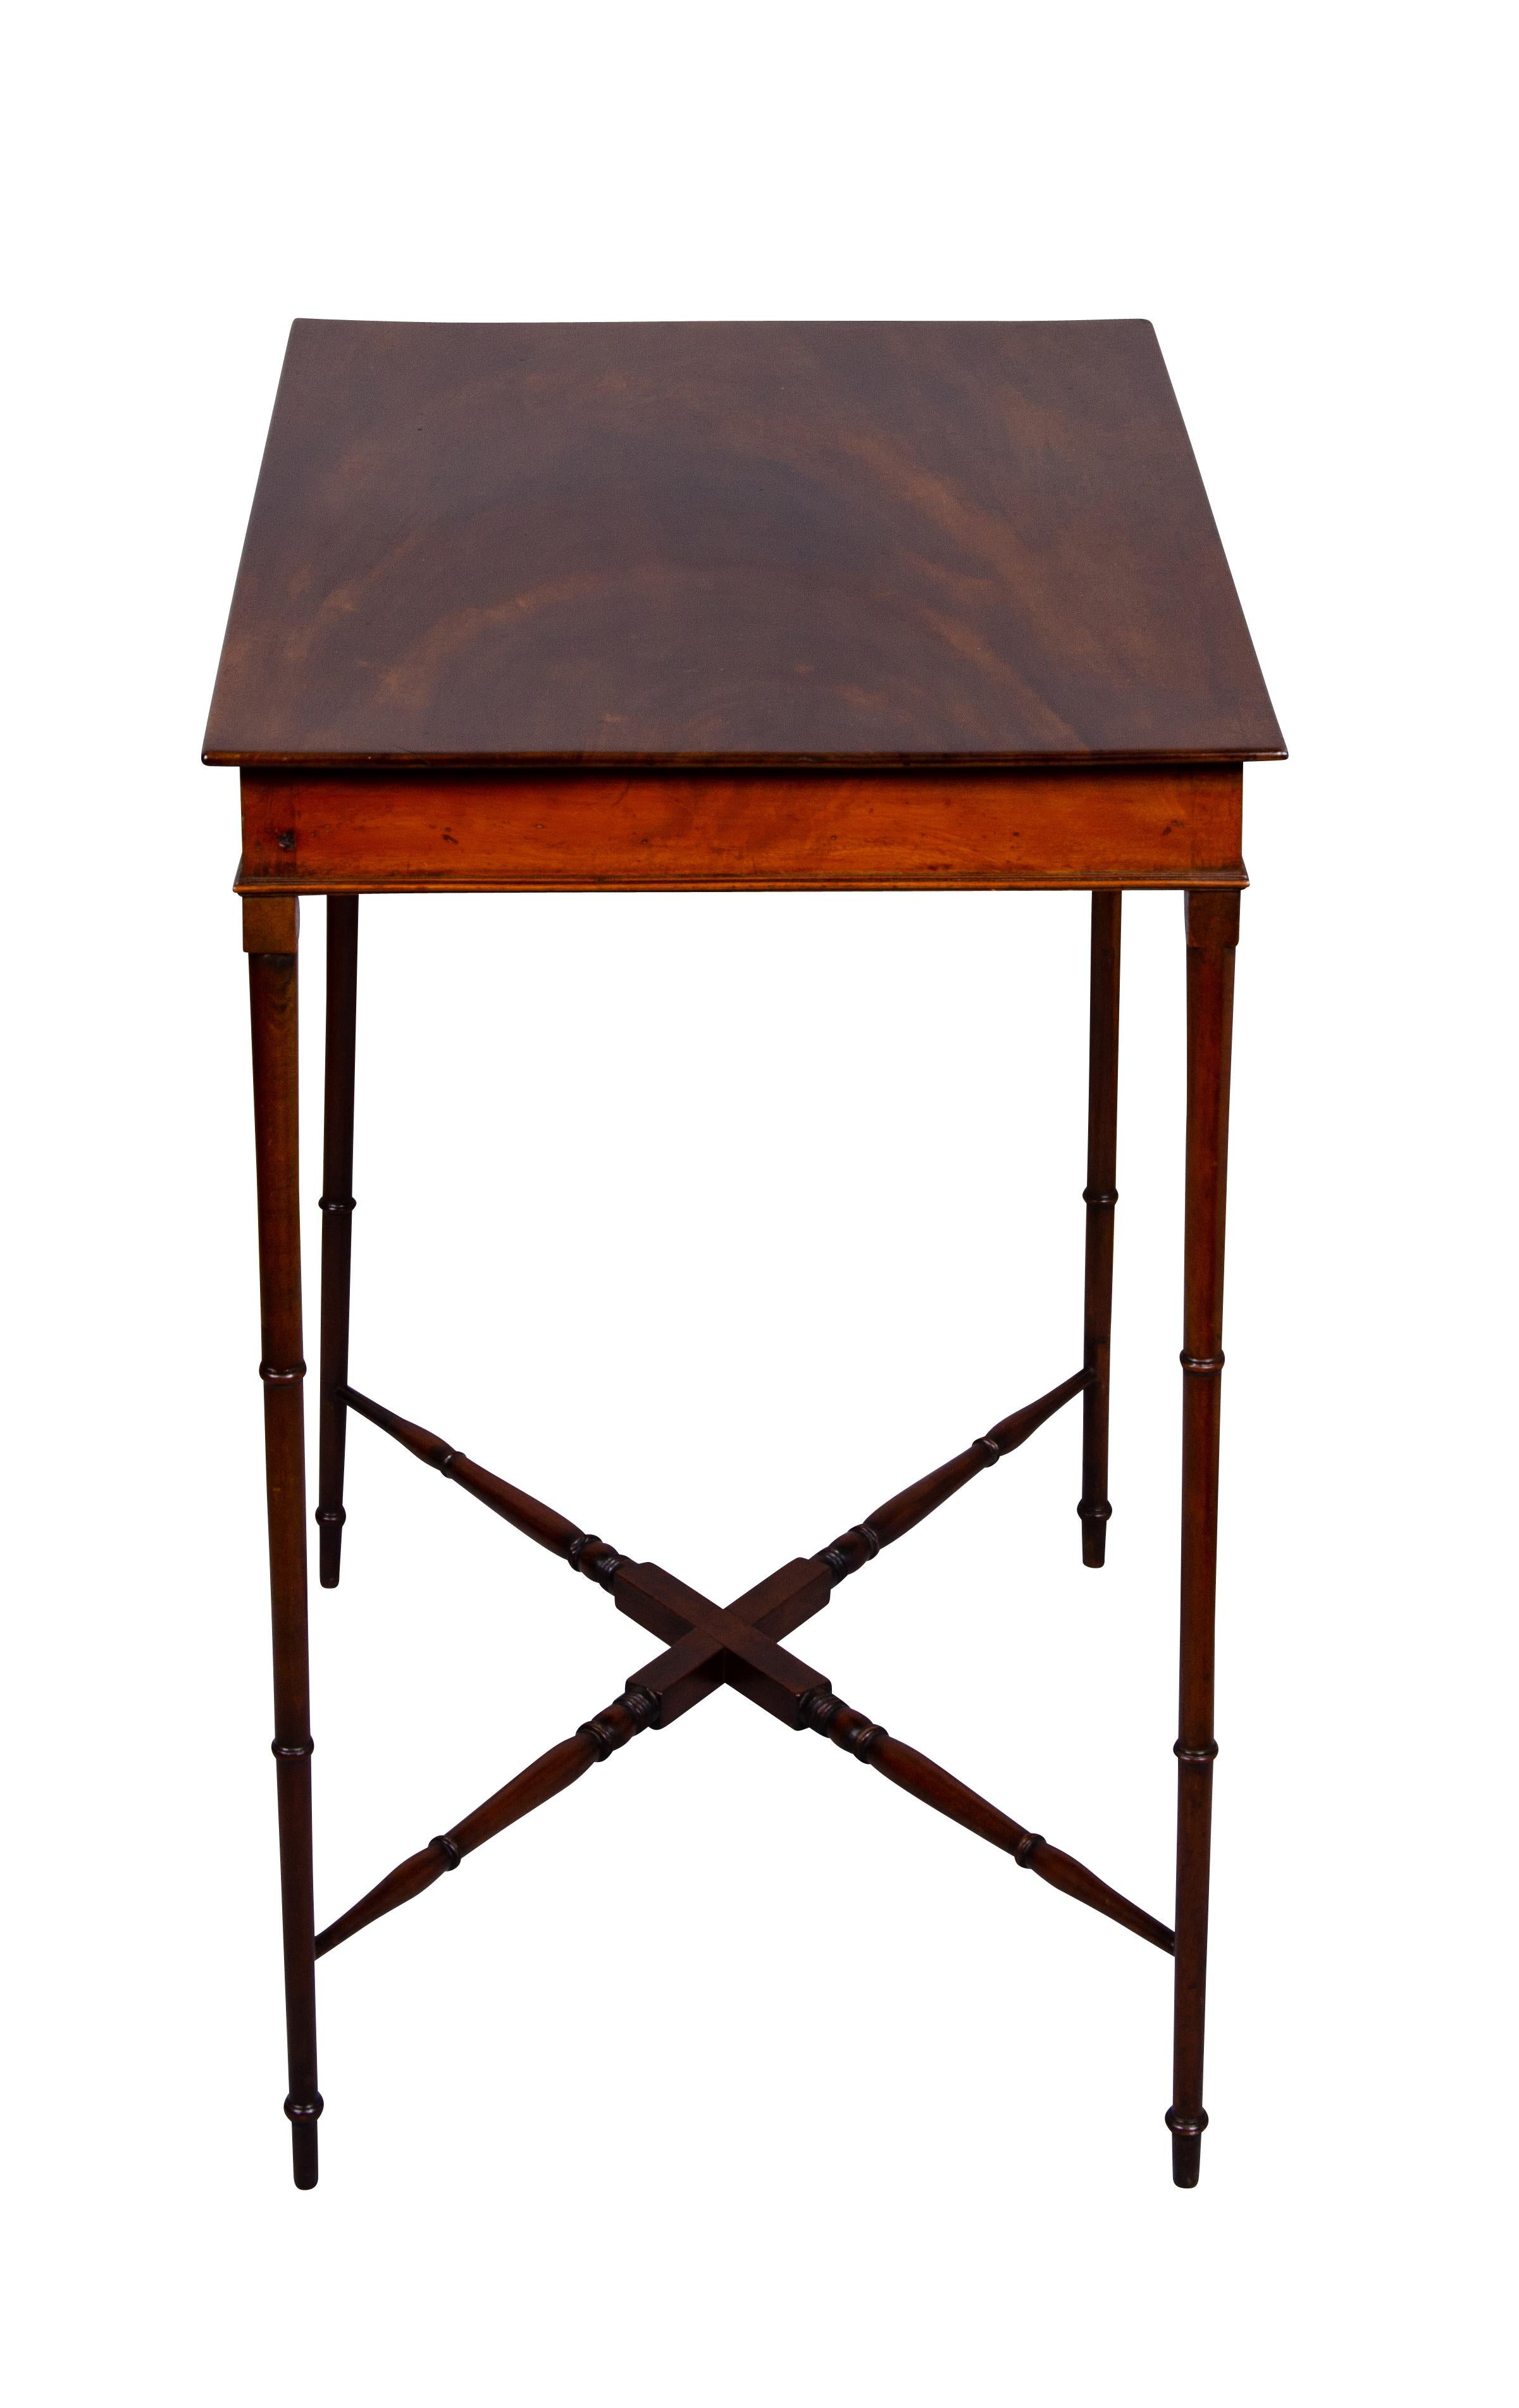 Early 19th Century Regency Mahogany Spider Leg Table For Sale